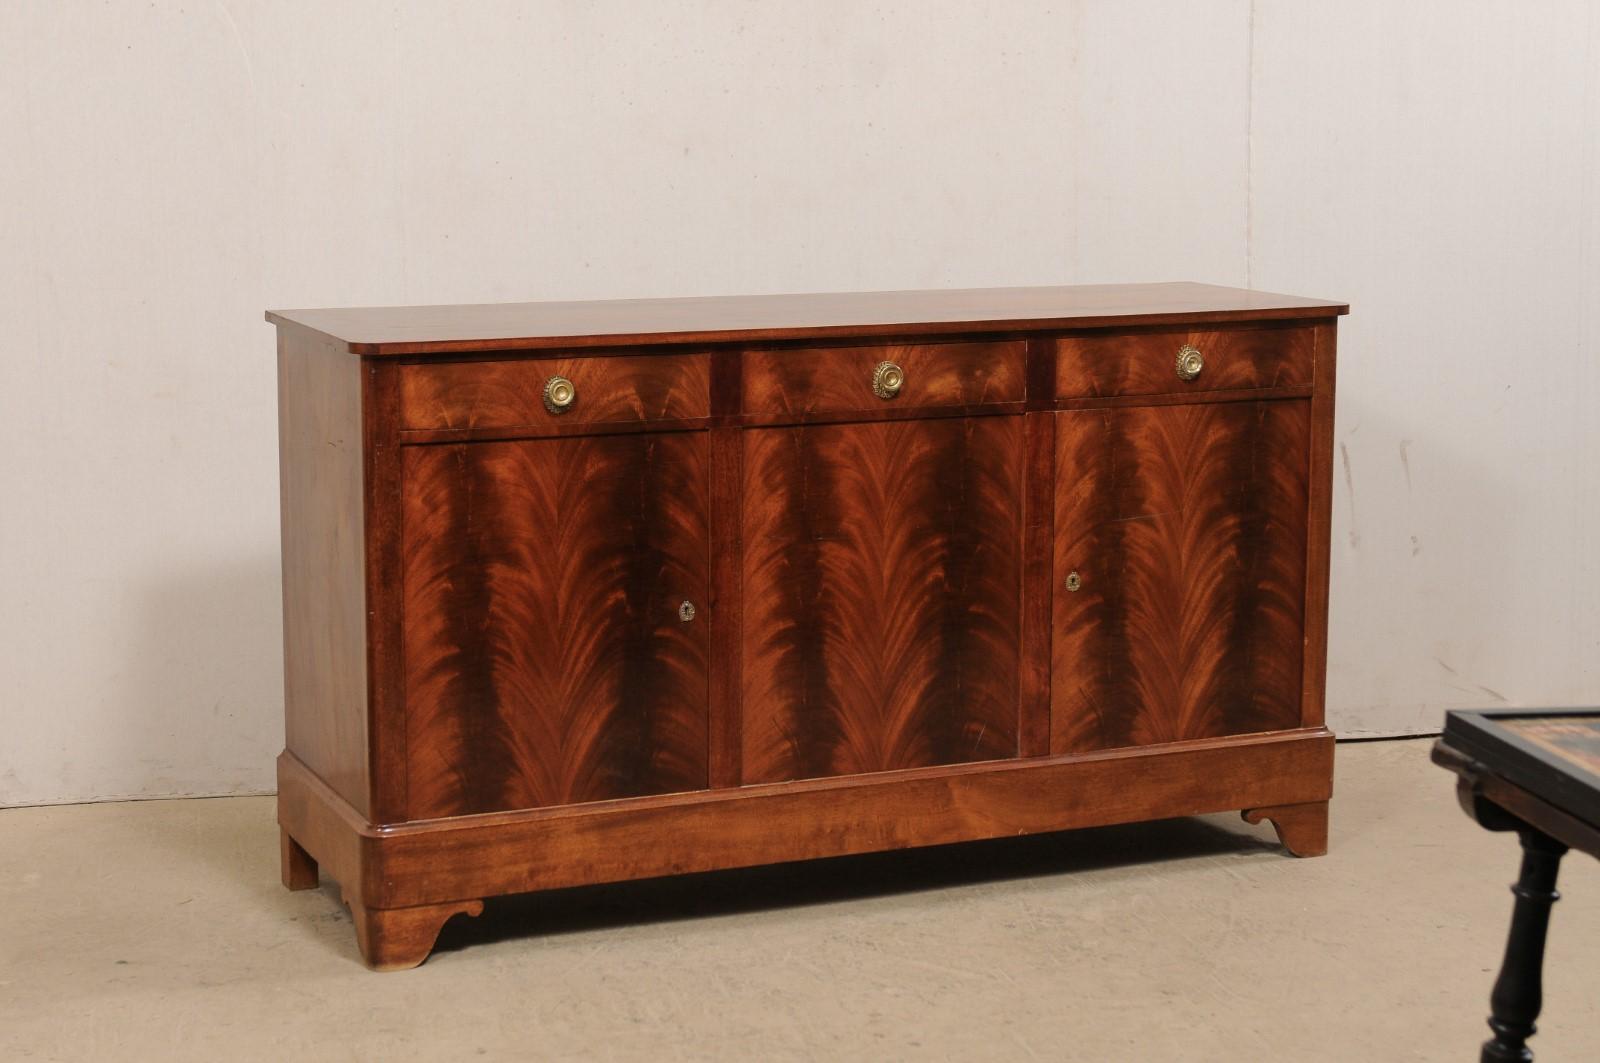 A French mahogany buffet cabinet from the mid 20th century. This mid-century French sideboard, just over 6 feet in length, is covered in a gorgeous fire-grain mahogany veneer. This case-piece houses three drawers along the top with three doors set